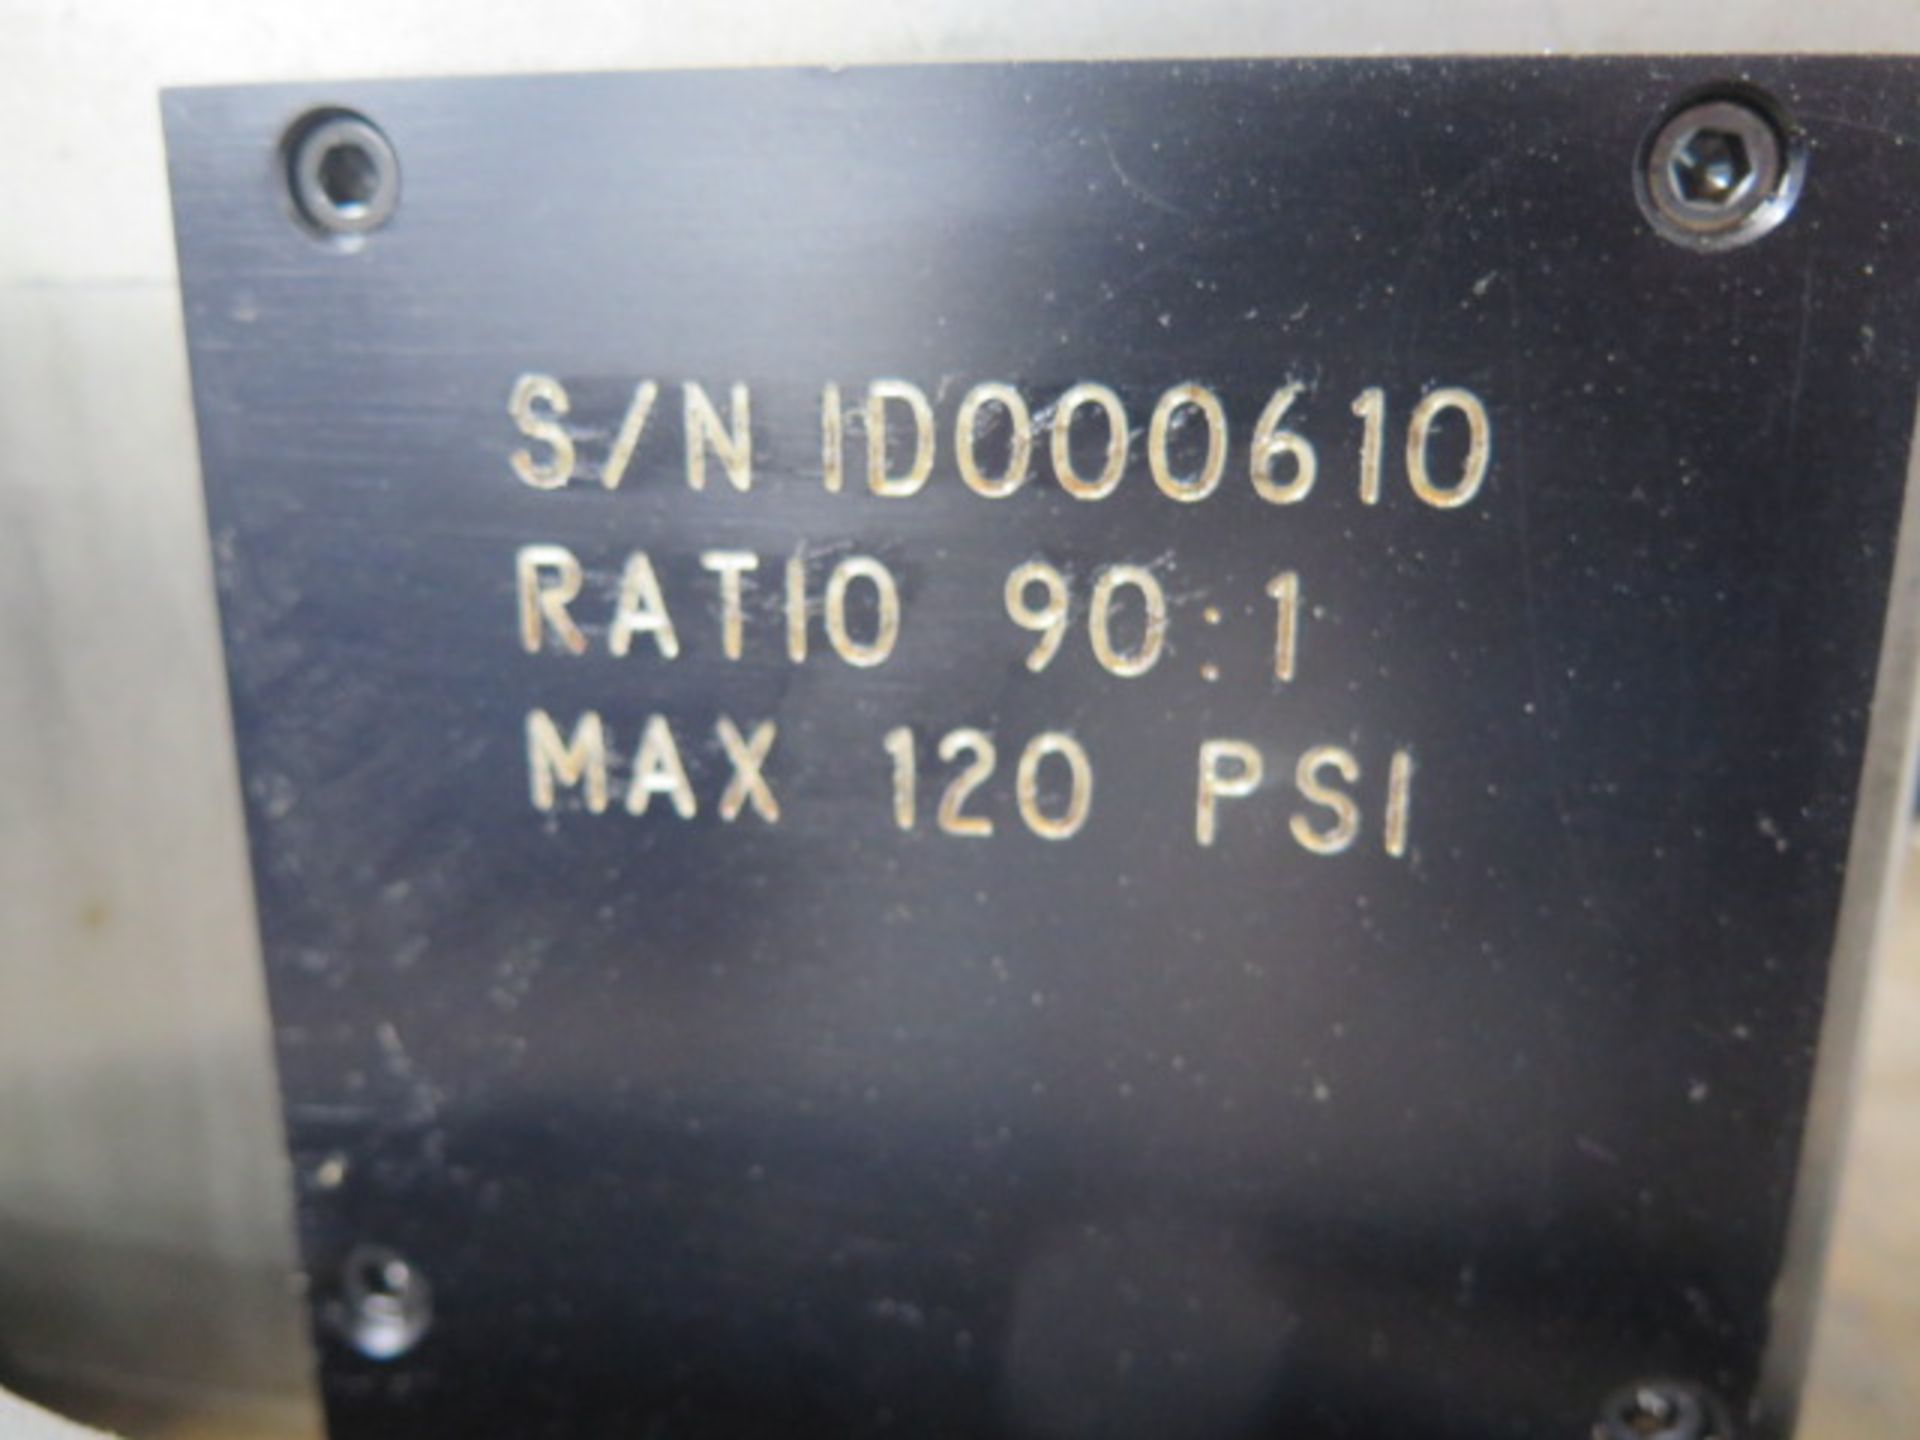 Index Designs 4th Axis 8” Rotary Head s/n ID000610 w/ Calmotion USB Indexer, 90:1 Ratio, SOLD AS IS - Image 11 of 11